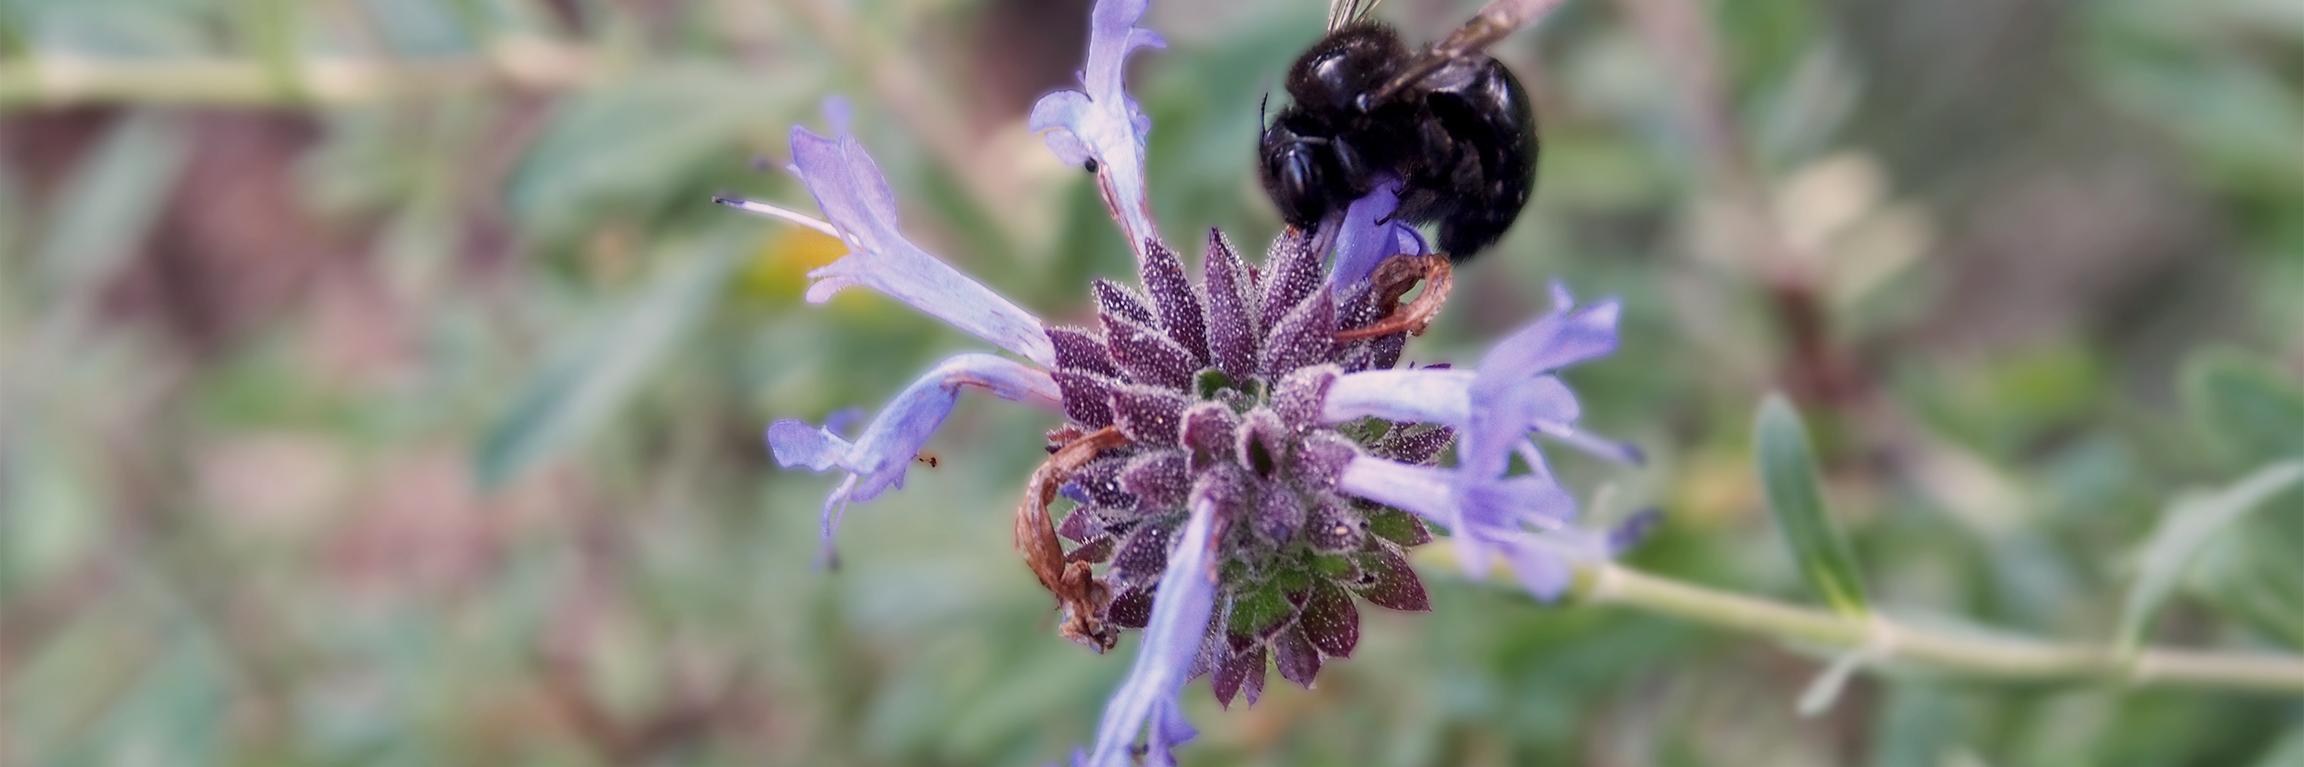 A black bee inspects a purple flower in front of a backdrop of foliage. 